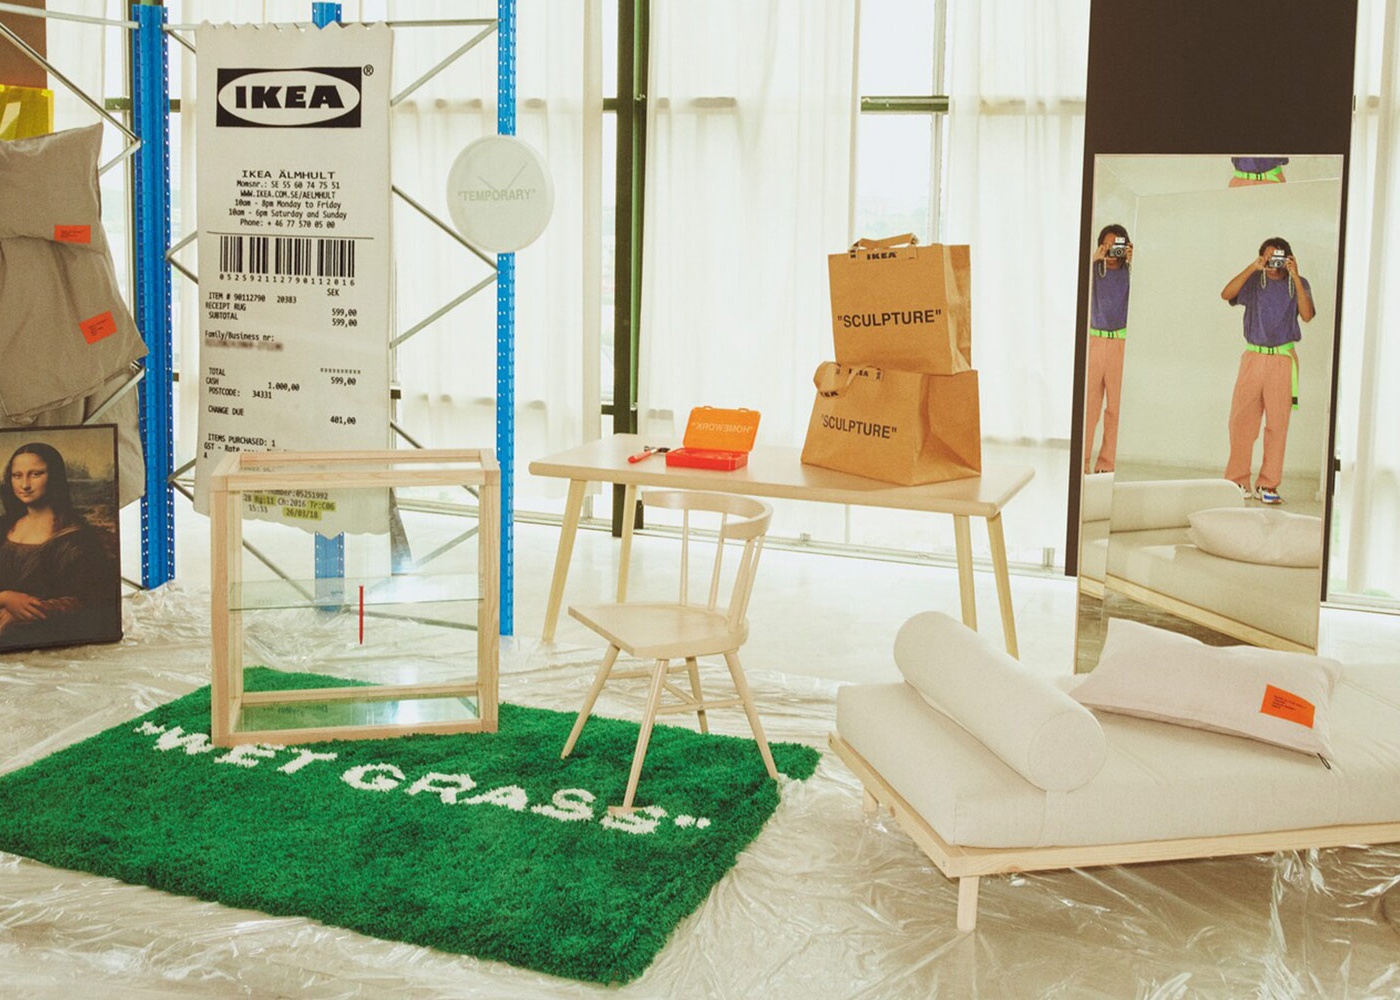 The Long-Awaited Virgil Abloh x IKEA Collection Has Finally Dropped